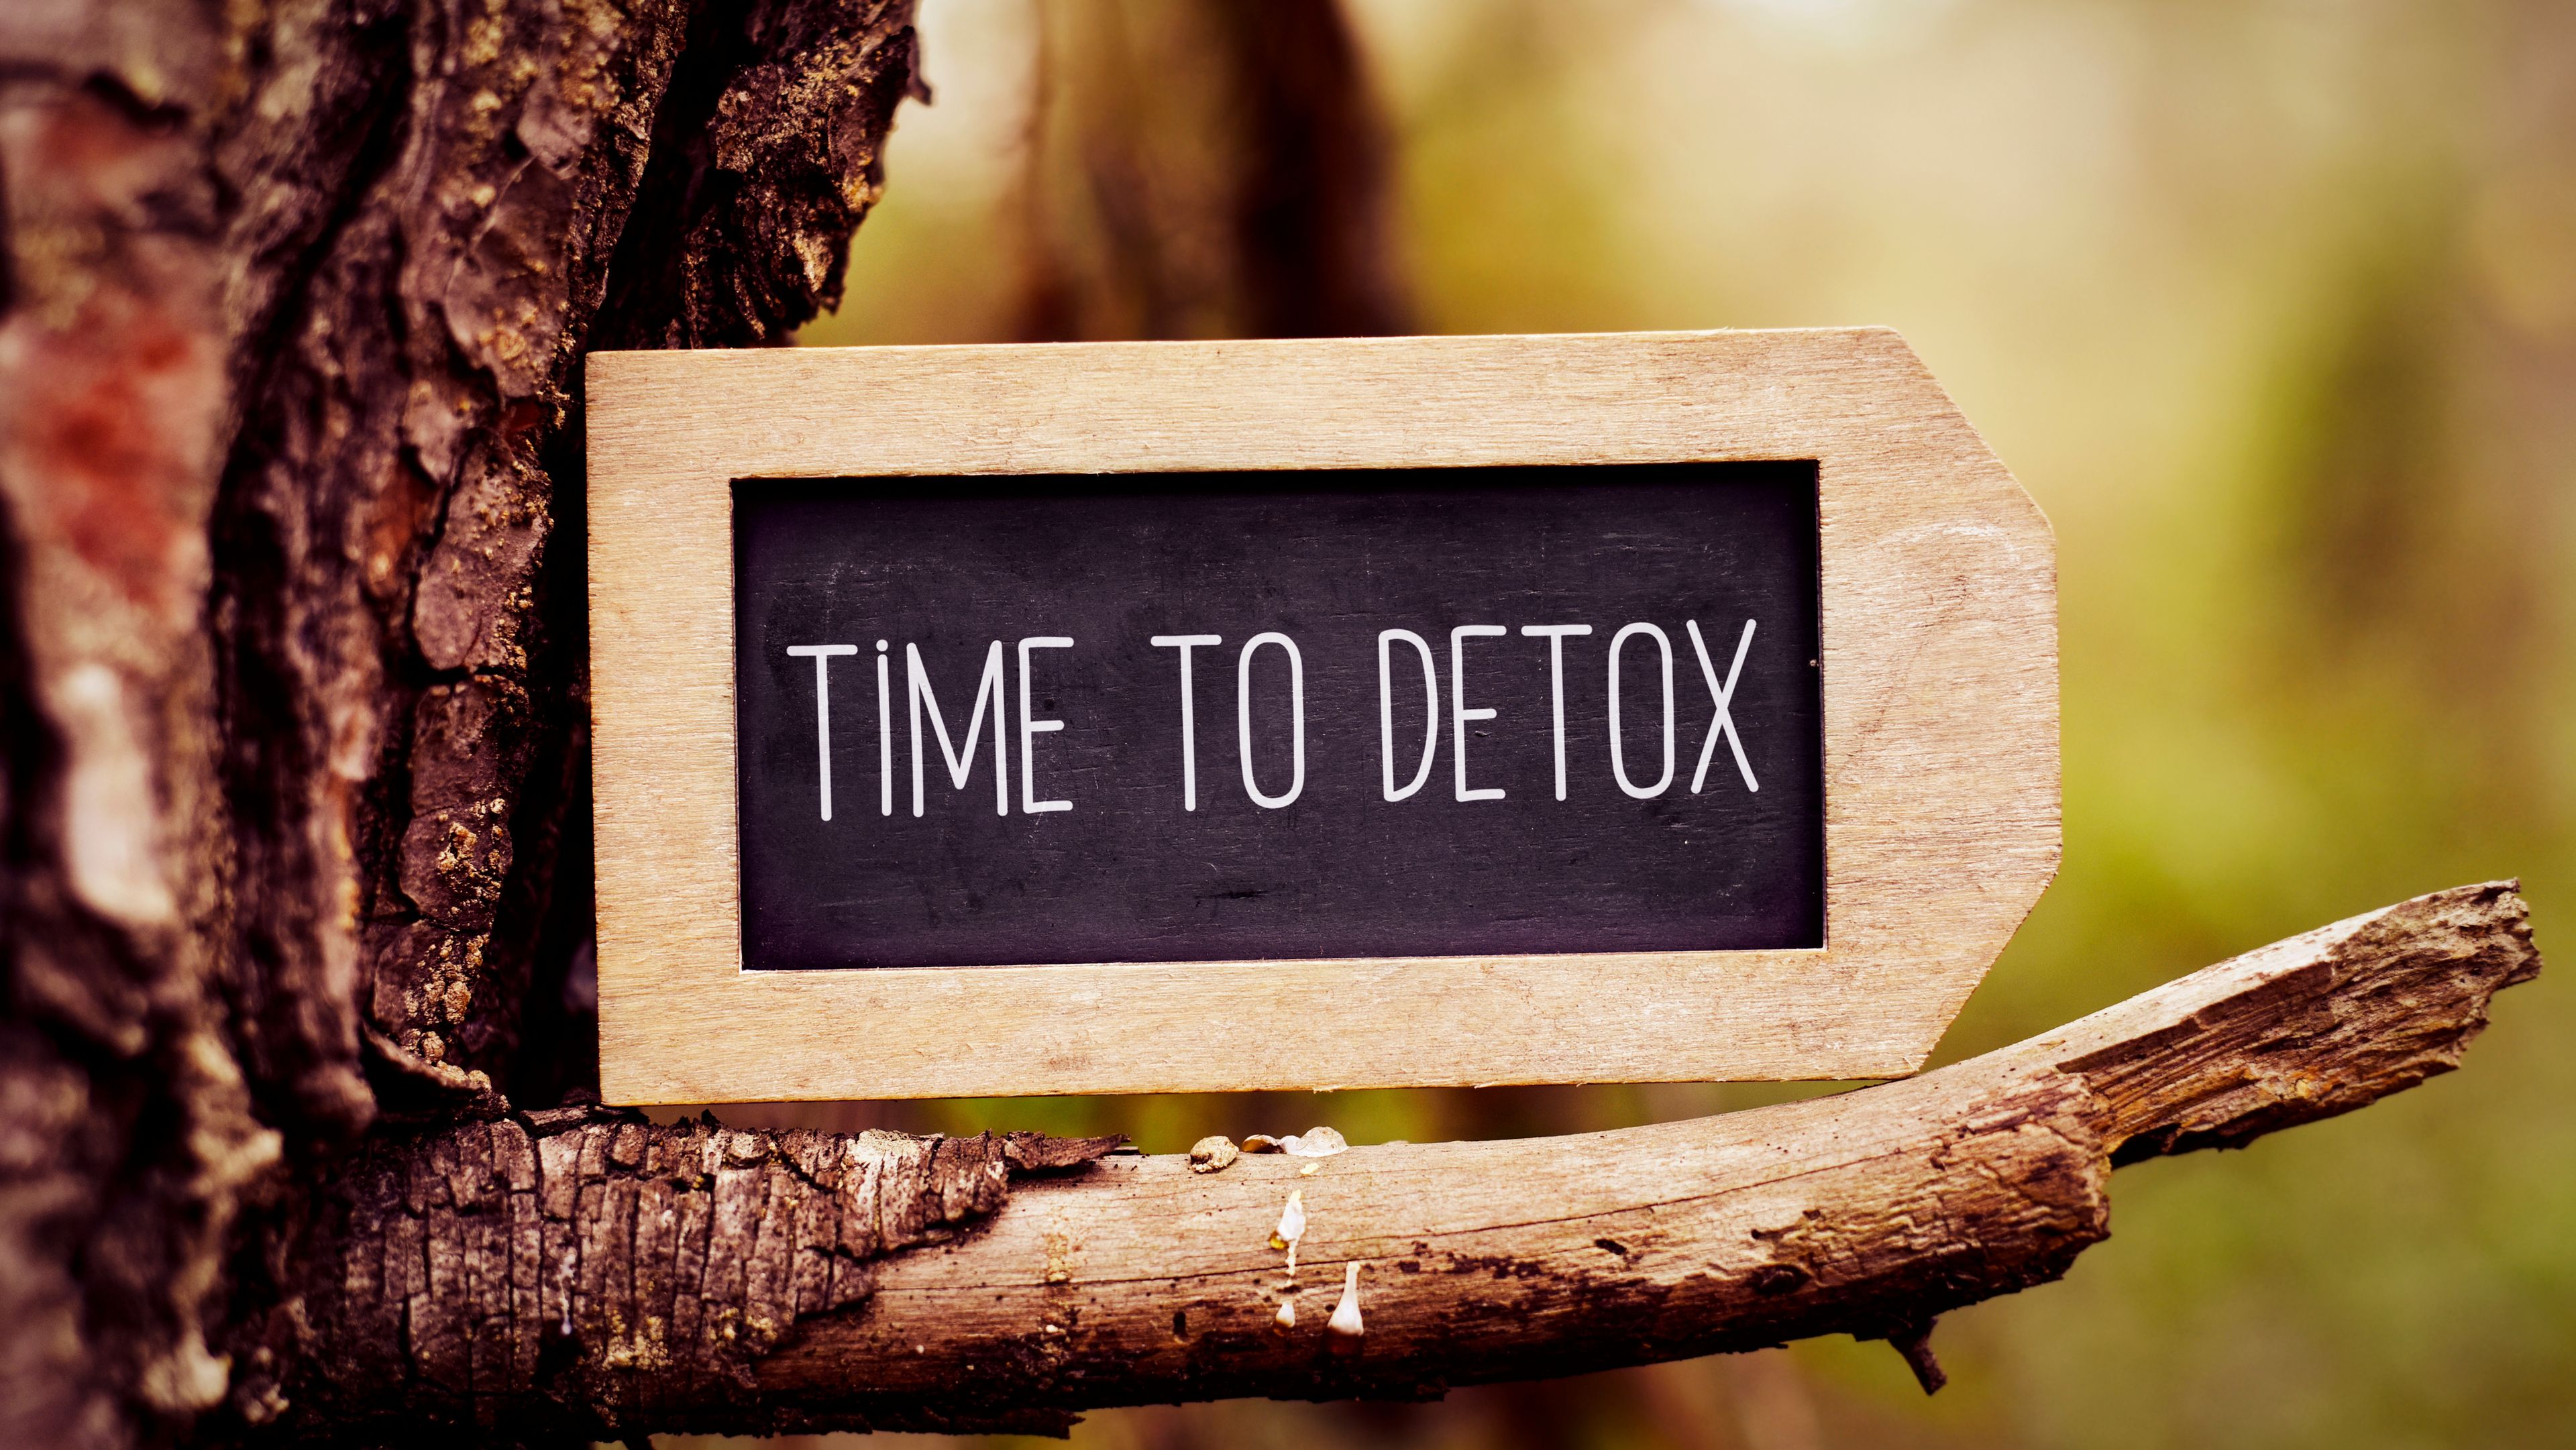 Backgrounds why detoxing is advisable